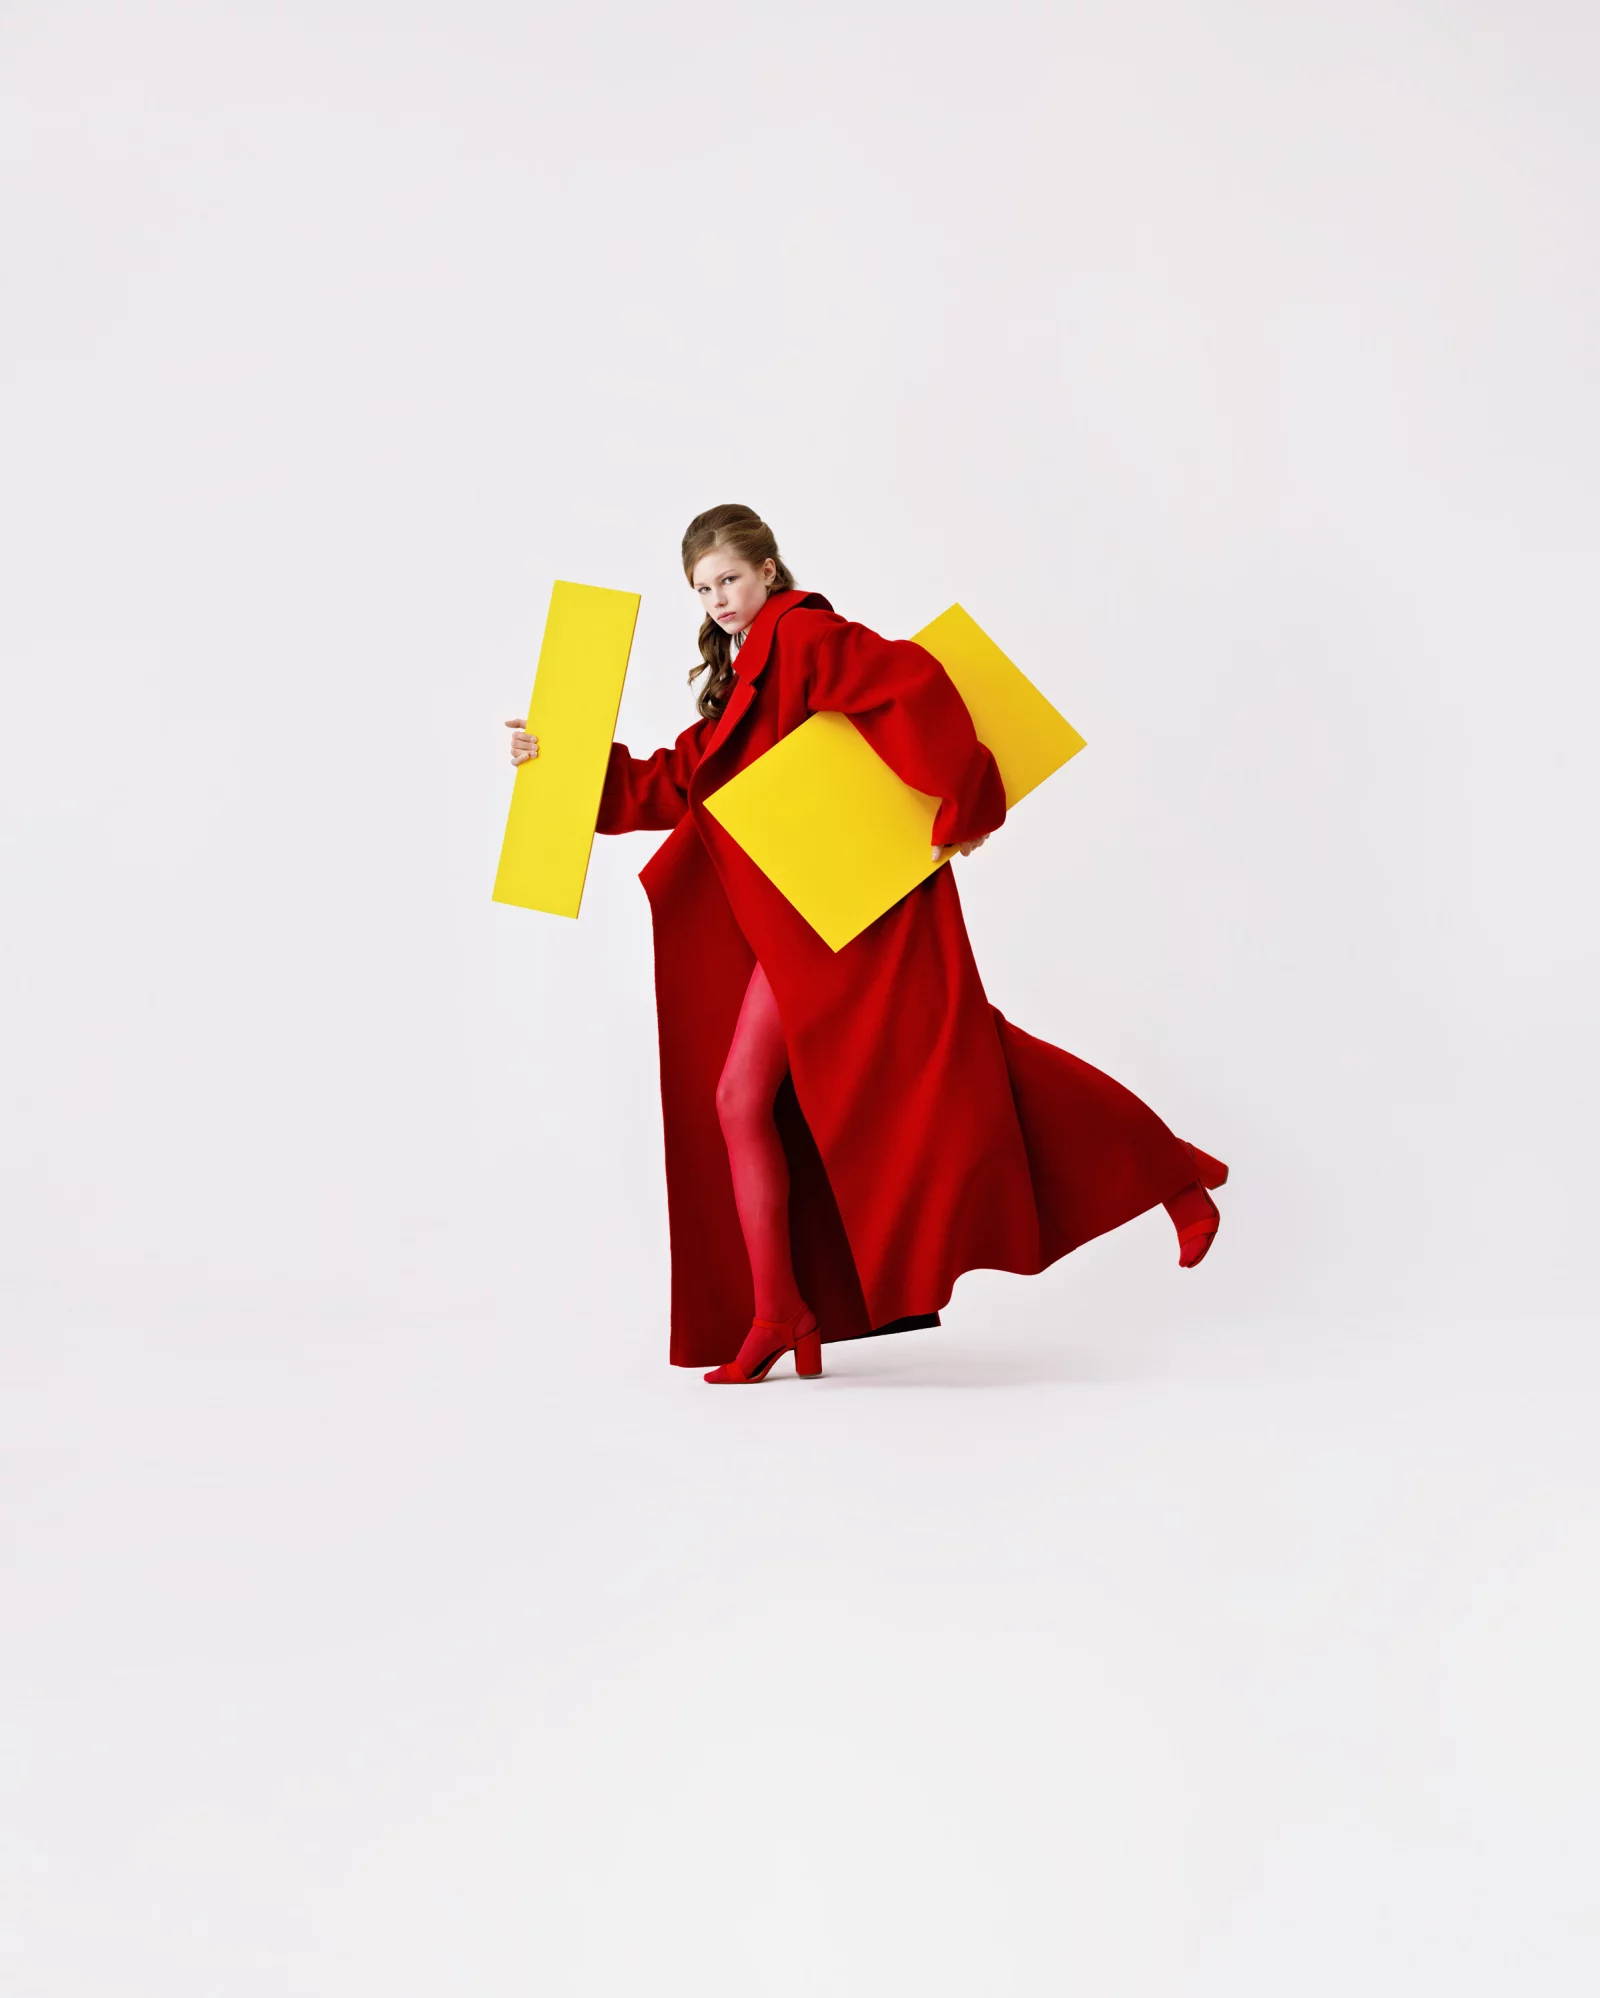 Objective 12 by Clemens ASCHER